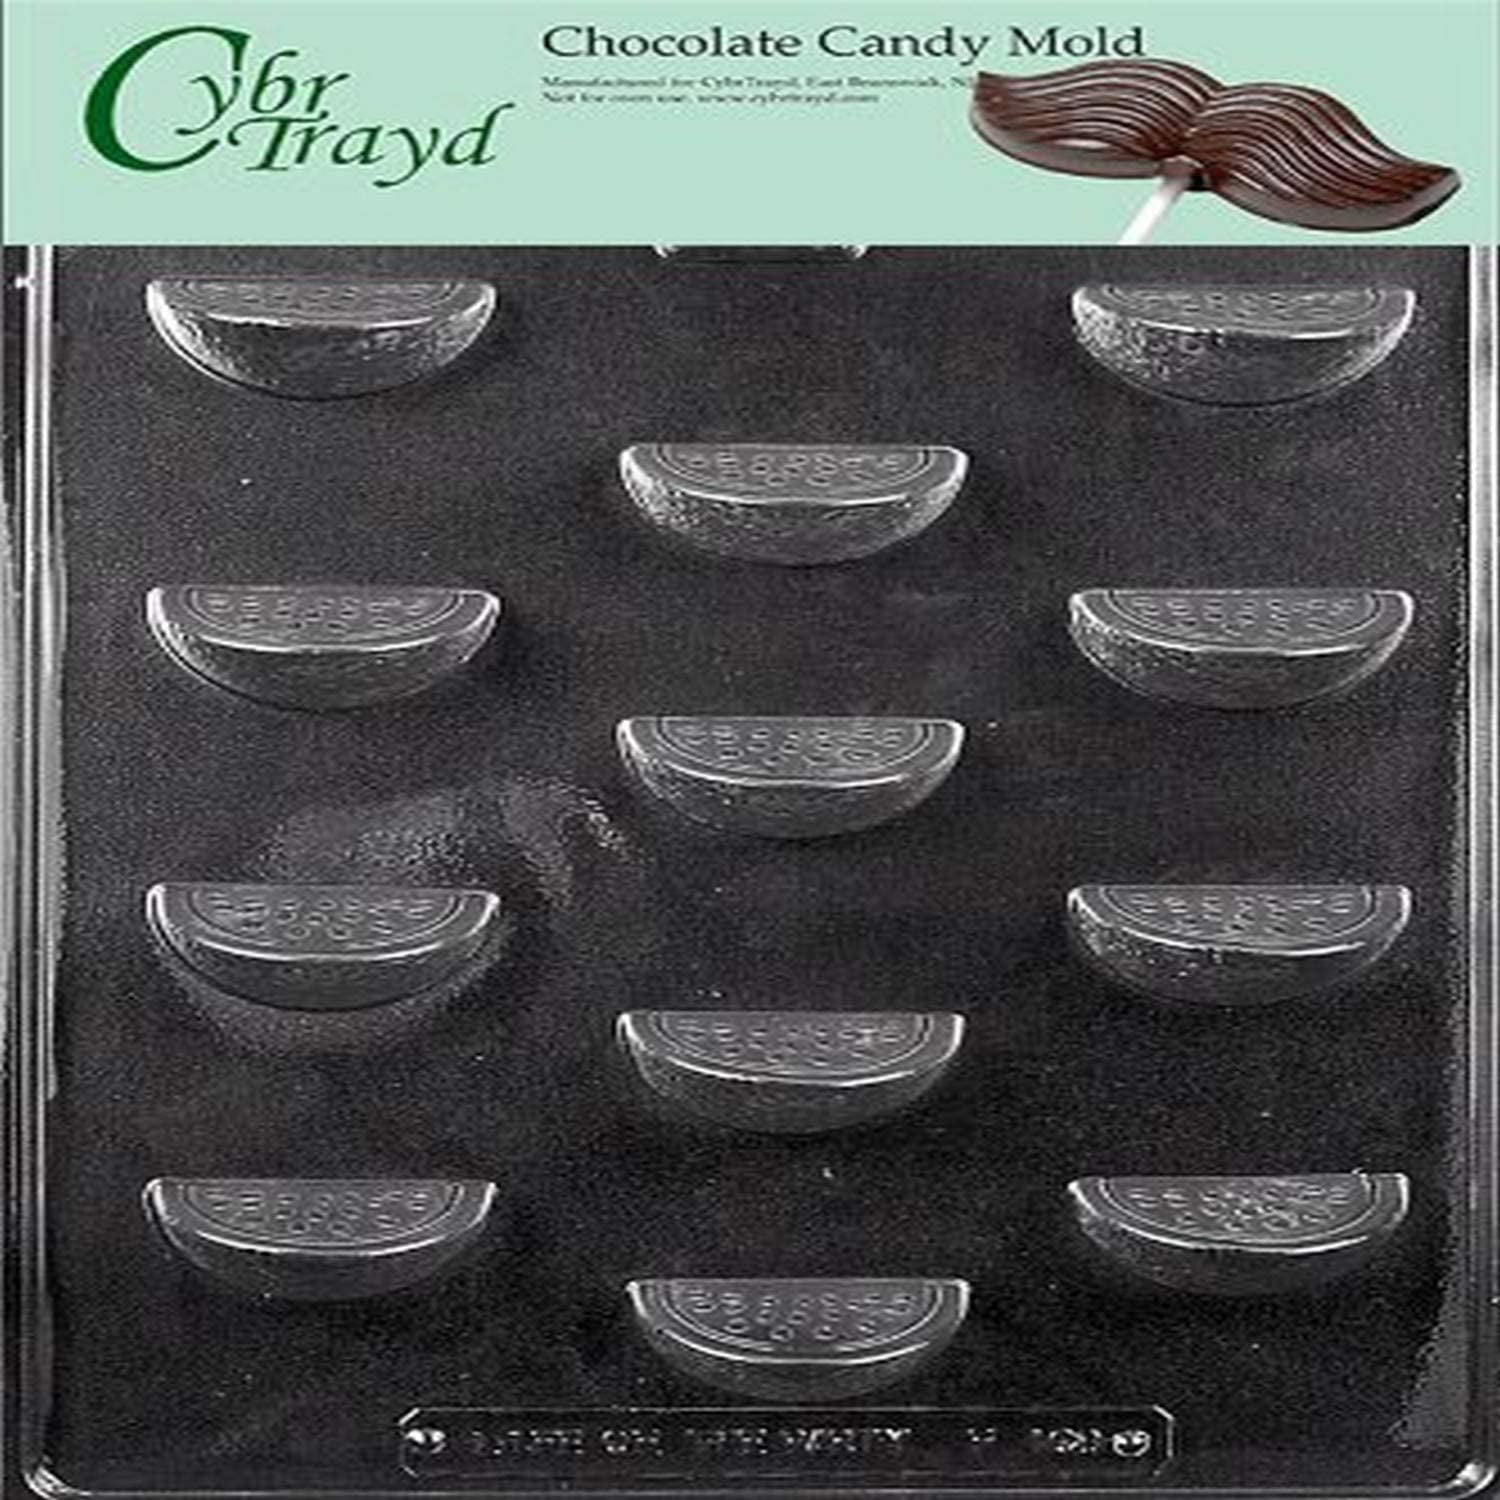 Cybrtrayd Chocolate Candy Mold Clear One Size